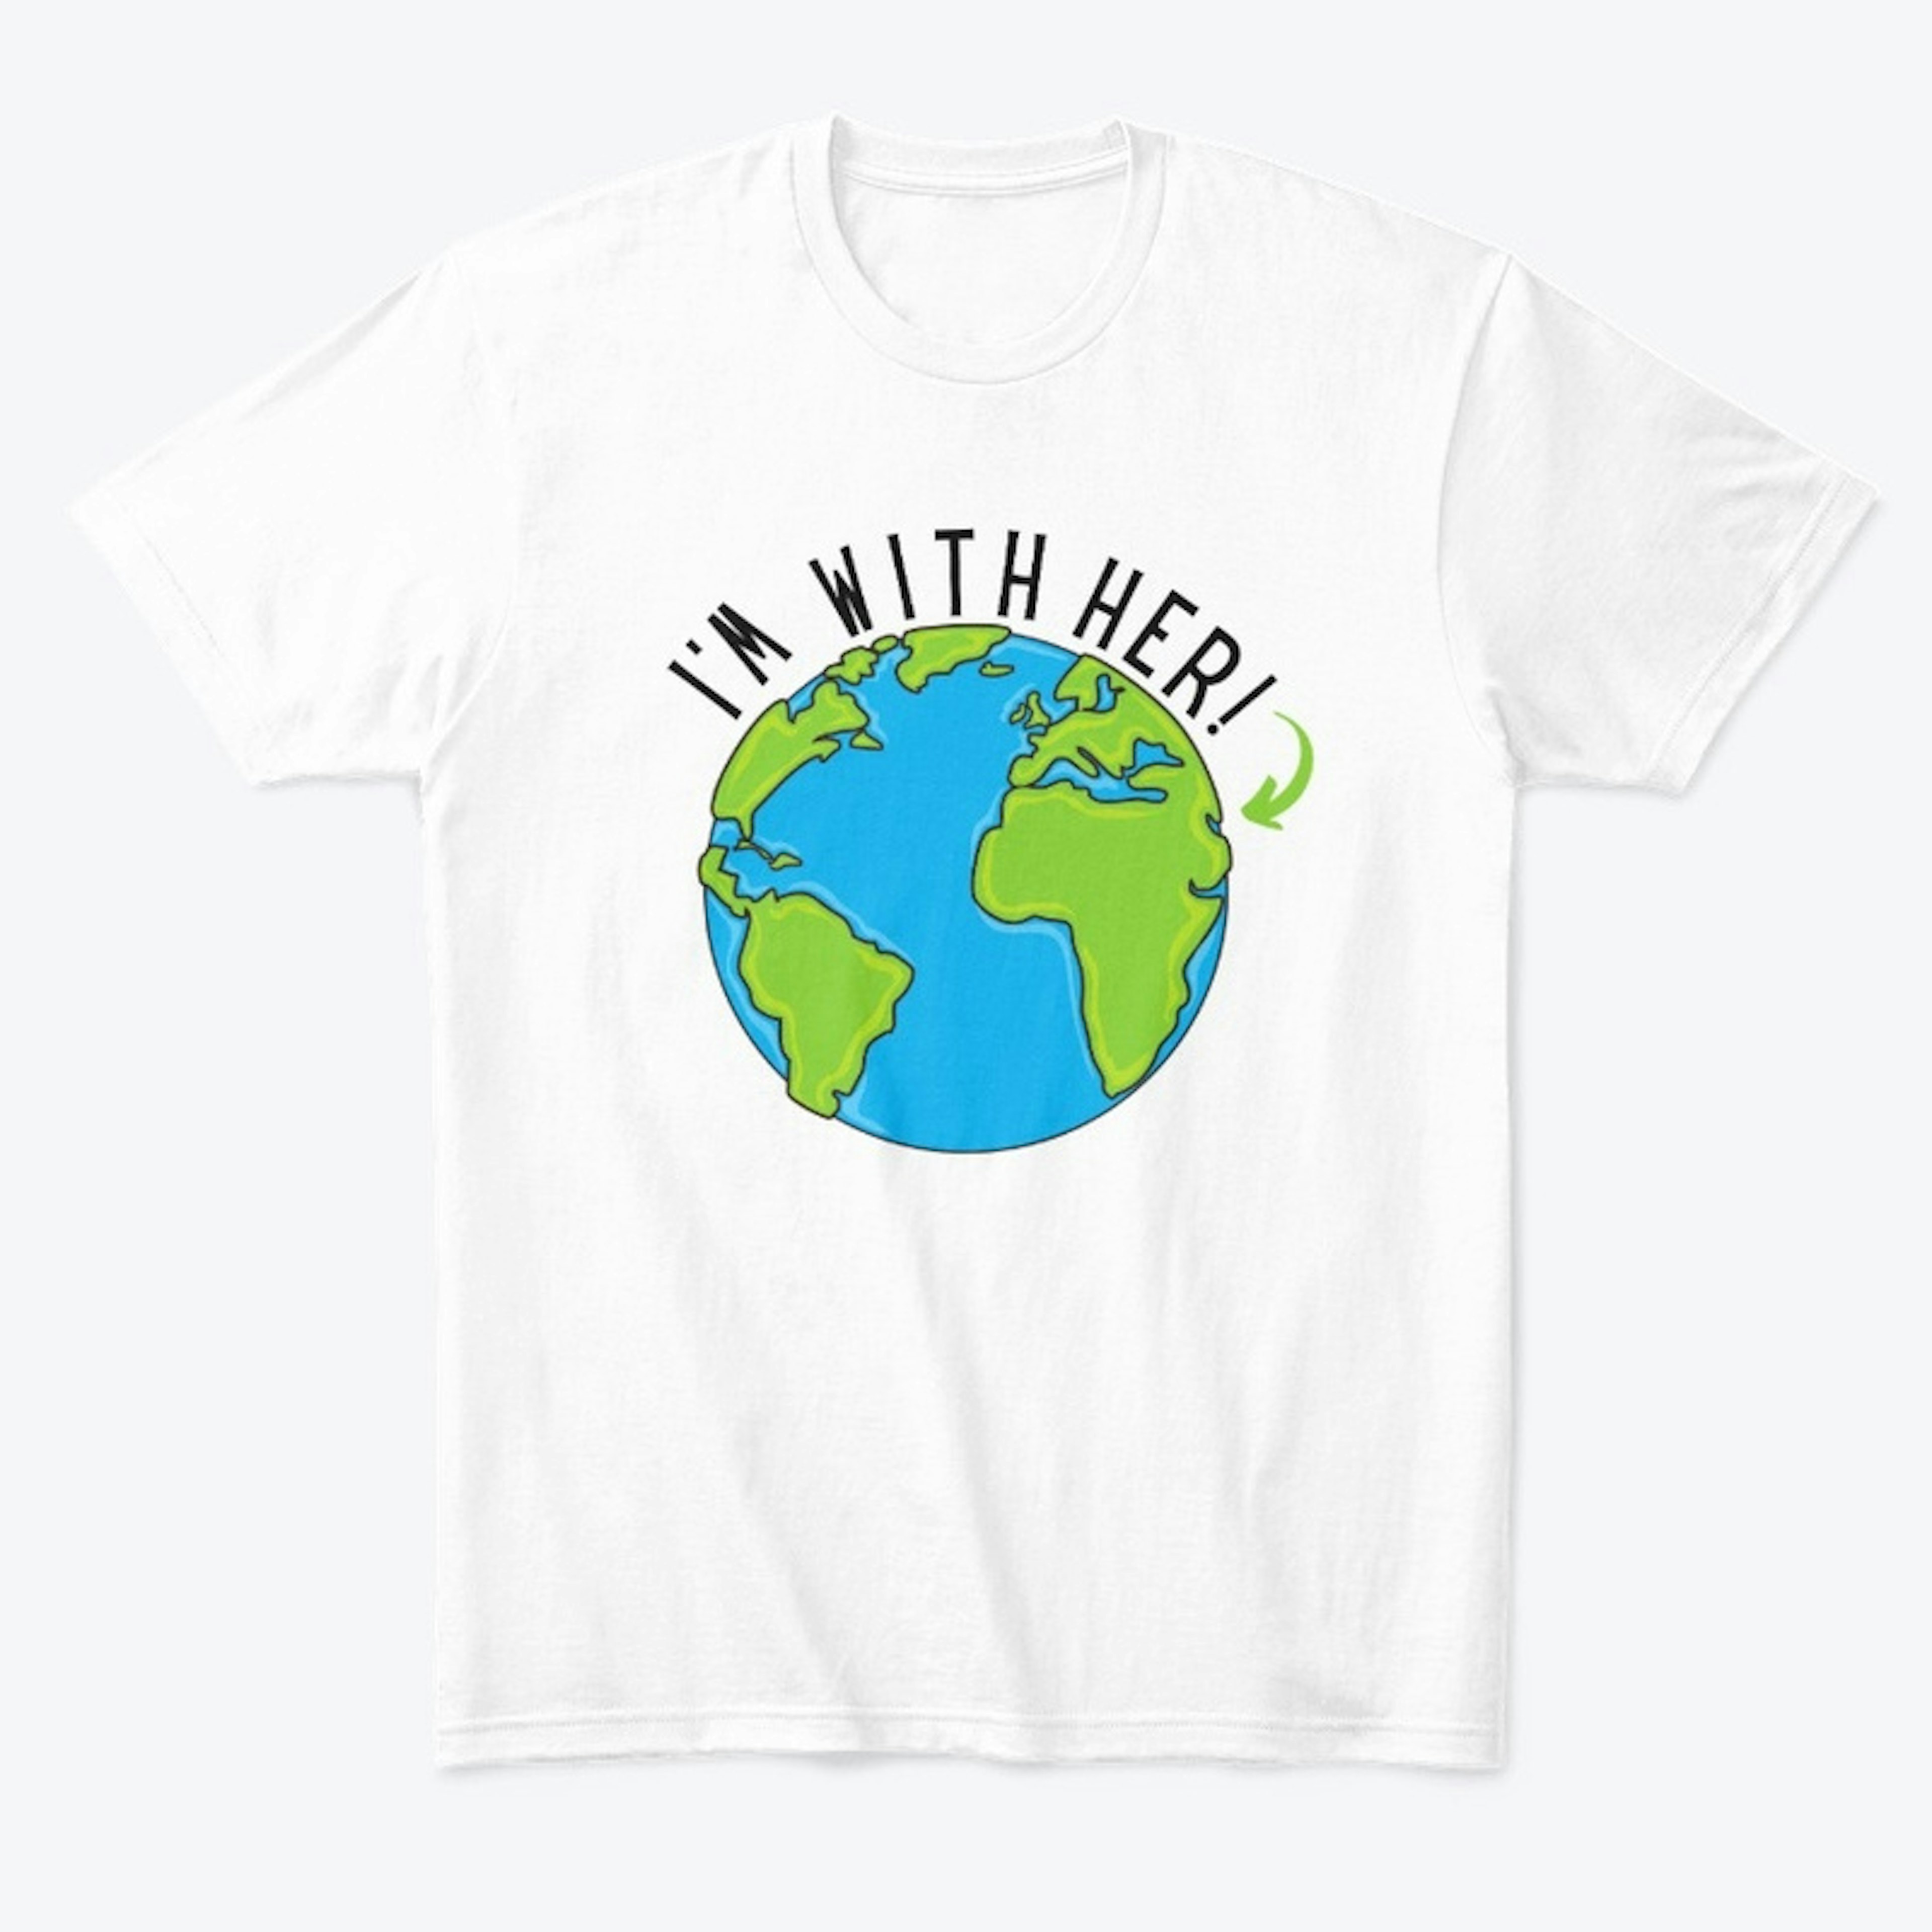 I'm with her! (Mother Earth)